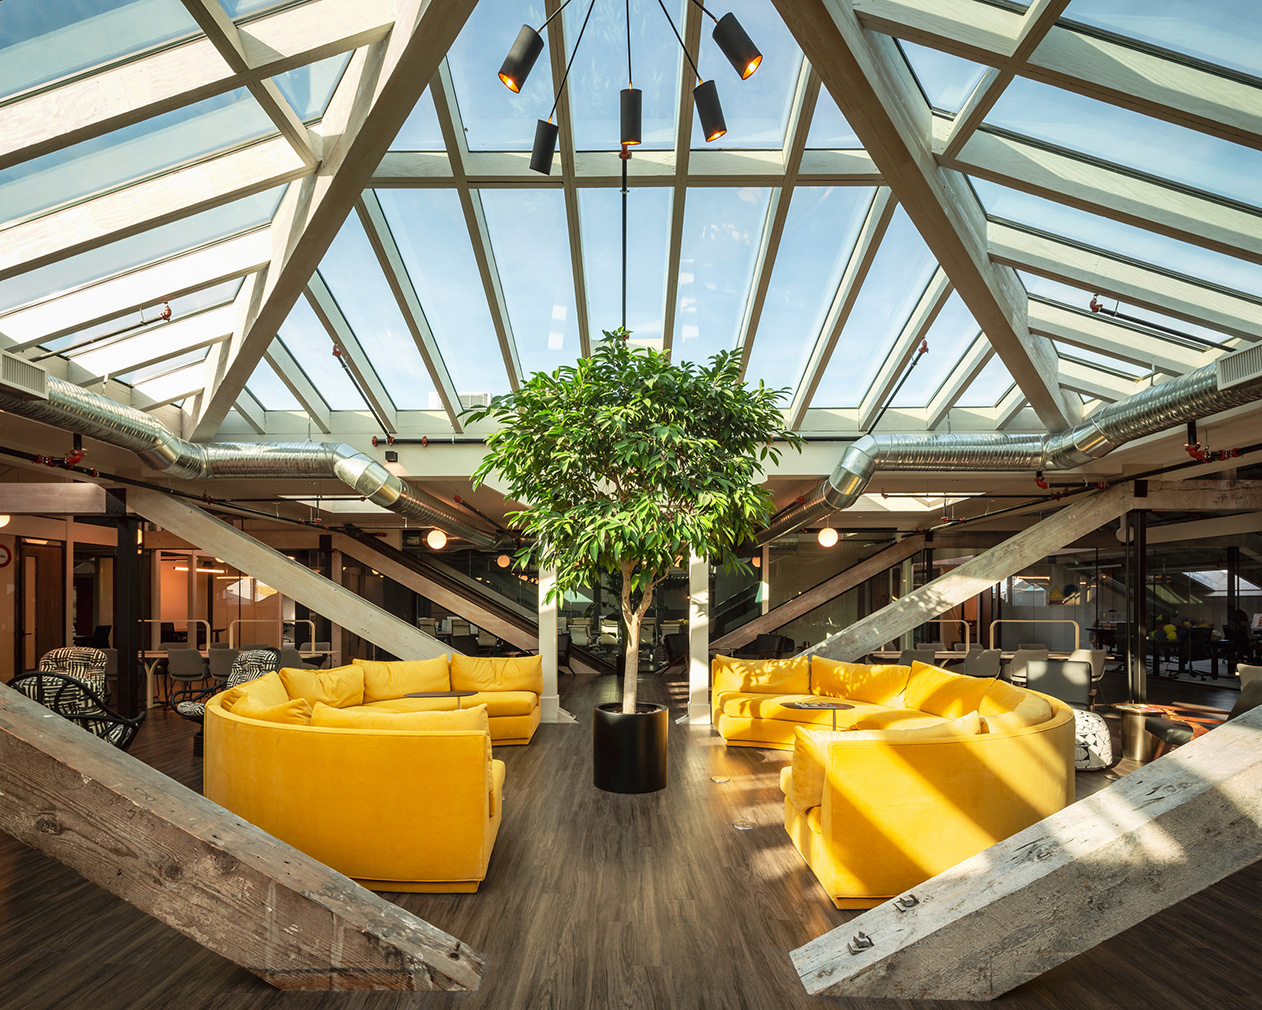 Victoria’s newest coworking space Kwench sits under a vast glass roof